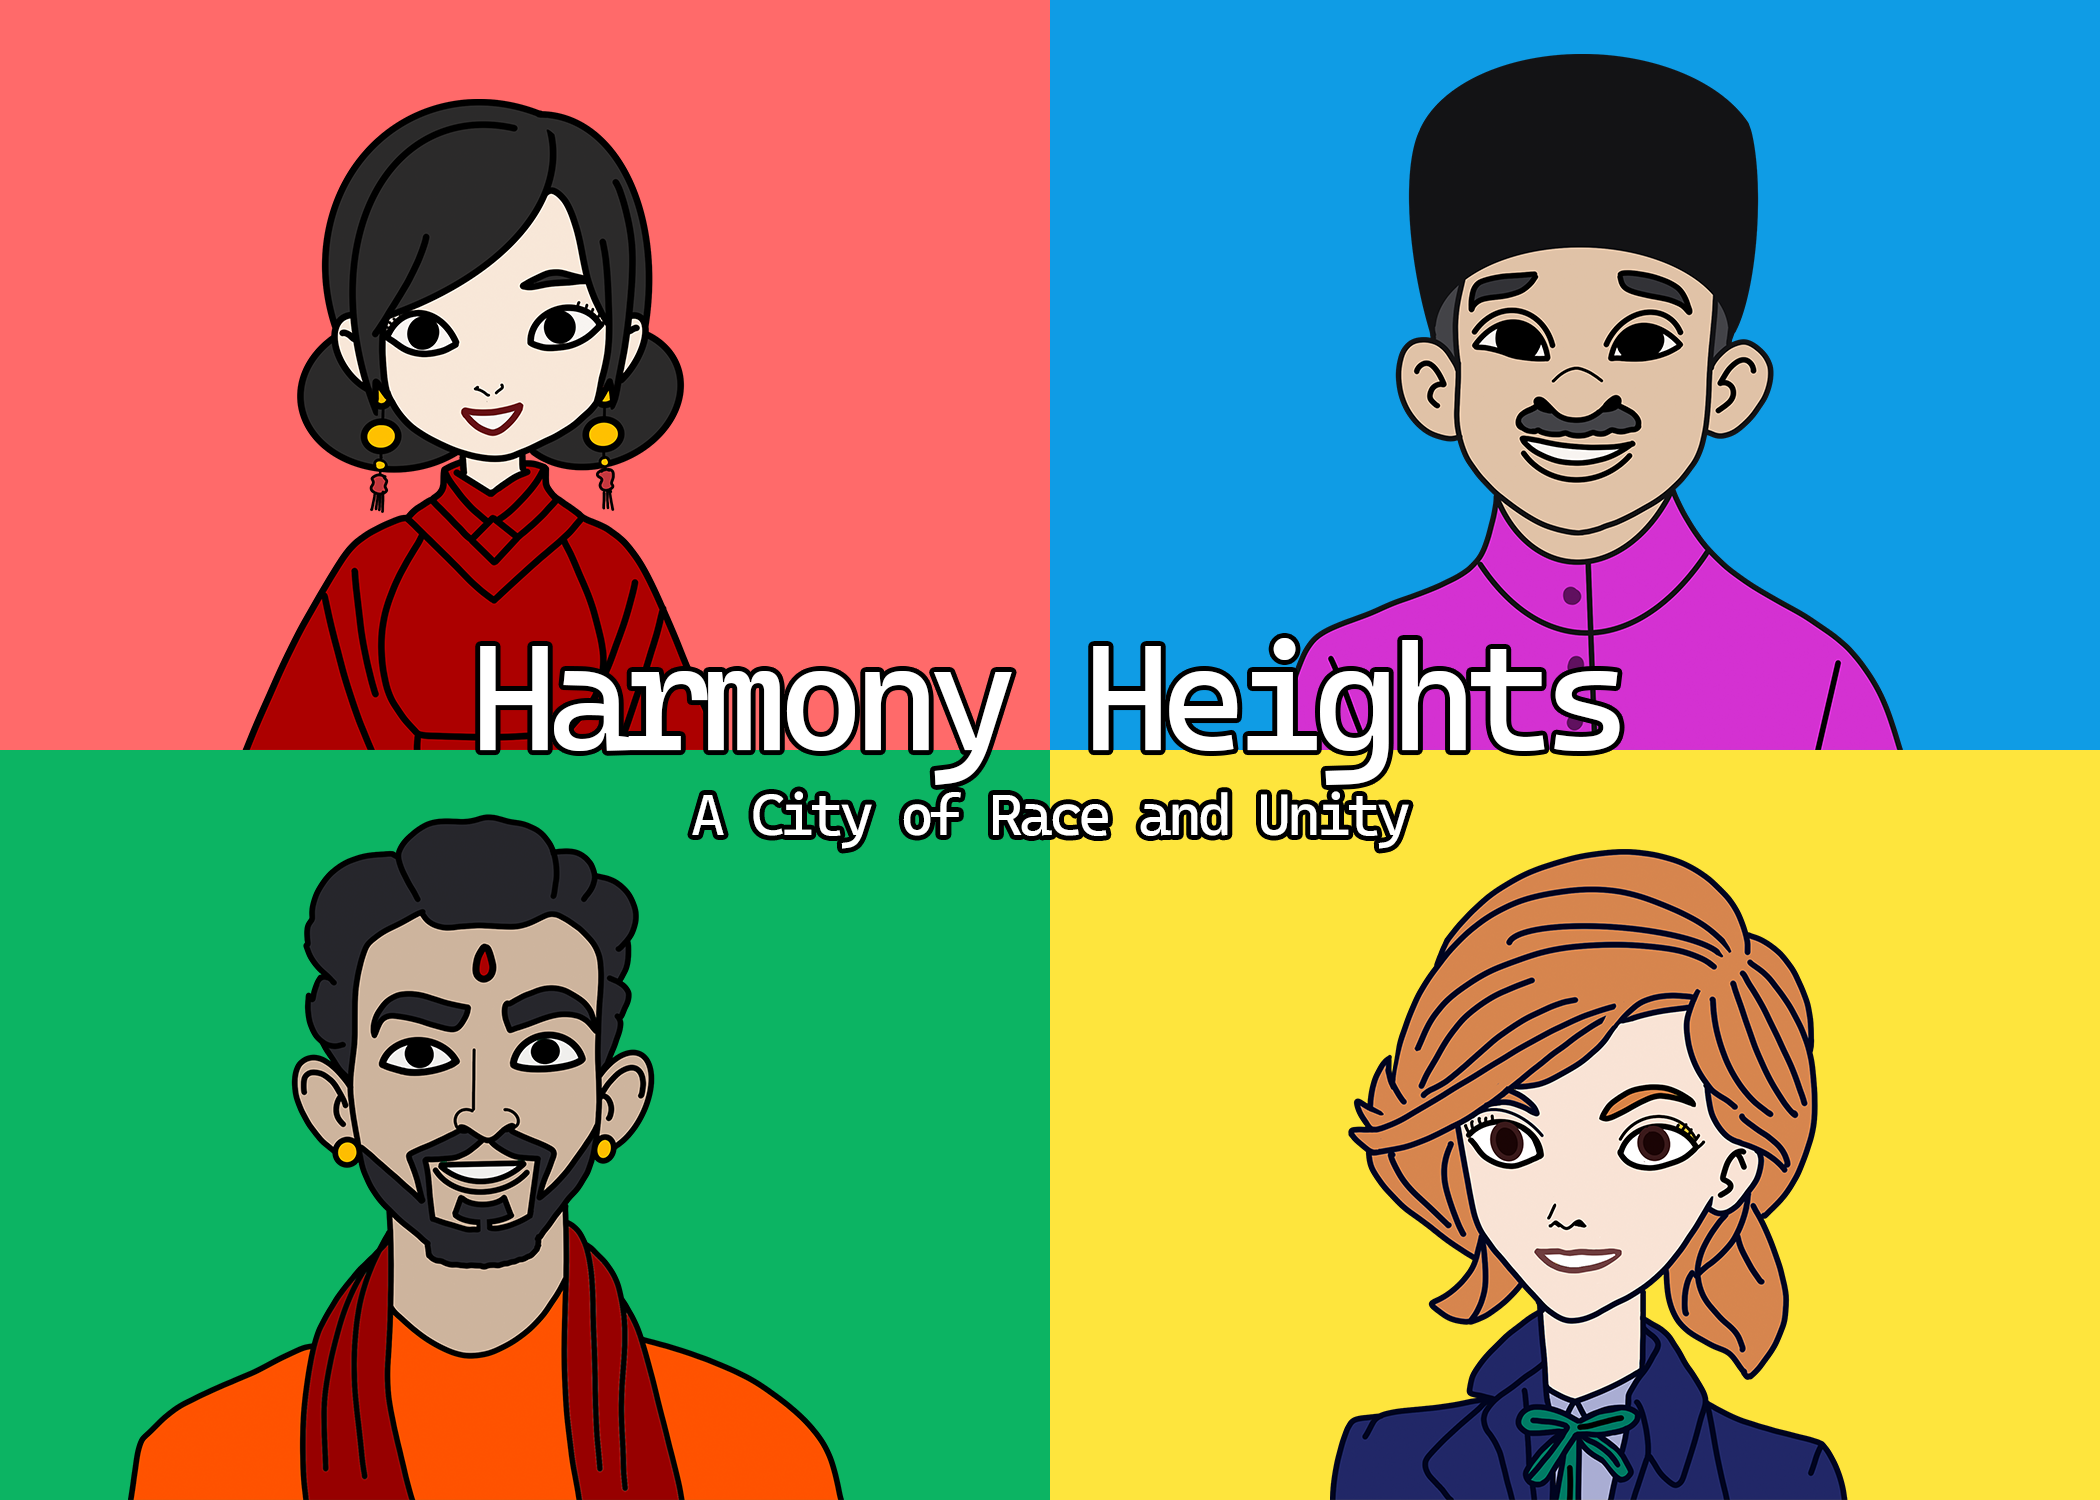 Harmony Heights - A City of Race and Unity